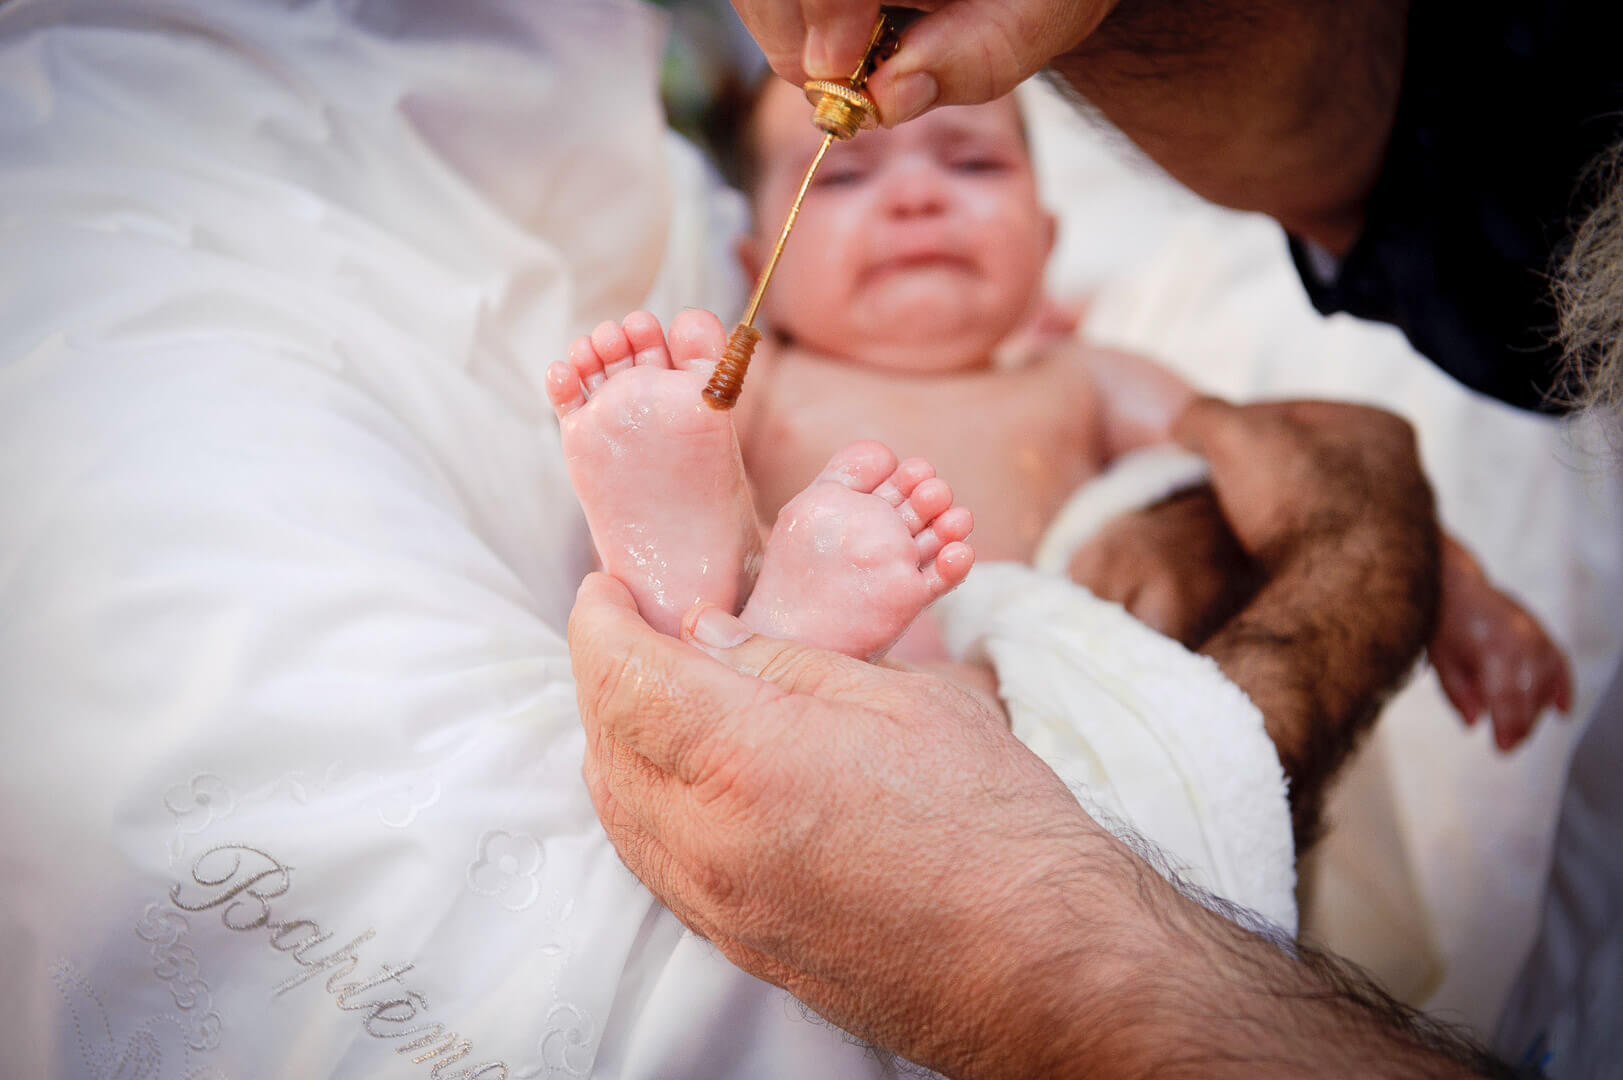 Sacred rite unfolds: Priest performs anointing with holy oil during a christening ceremony.